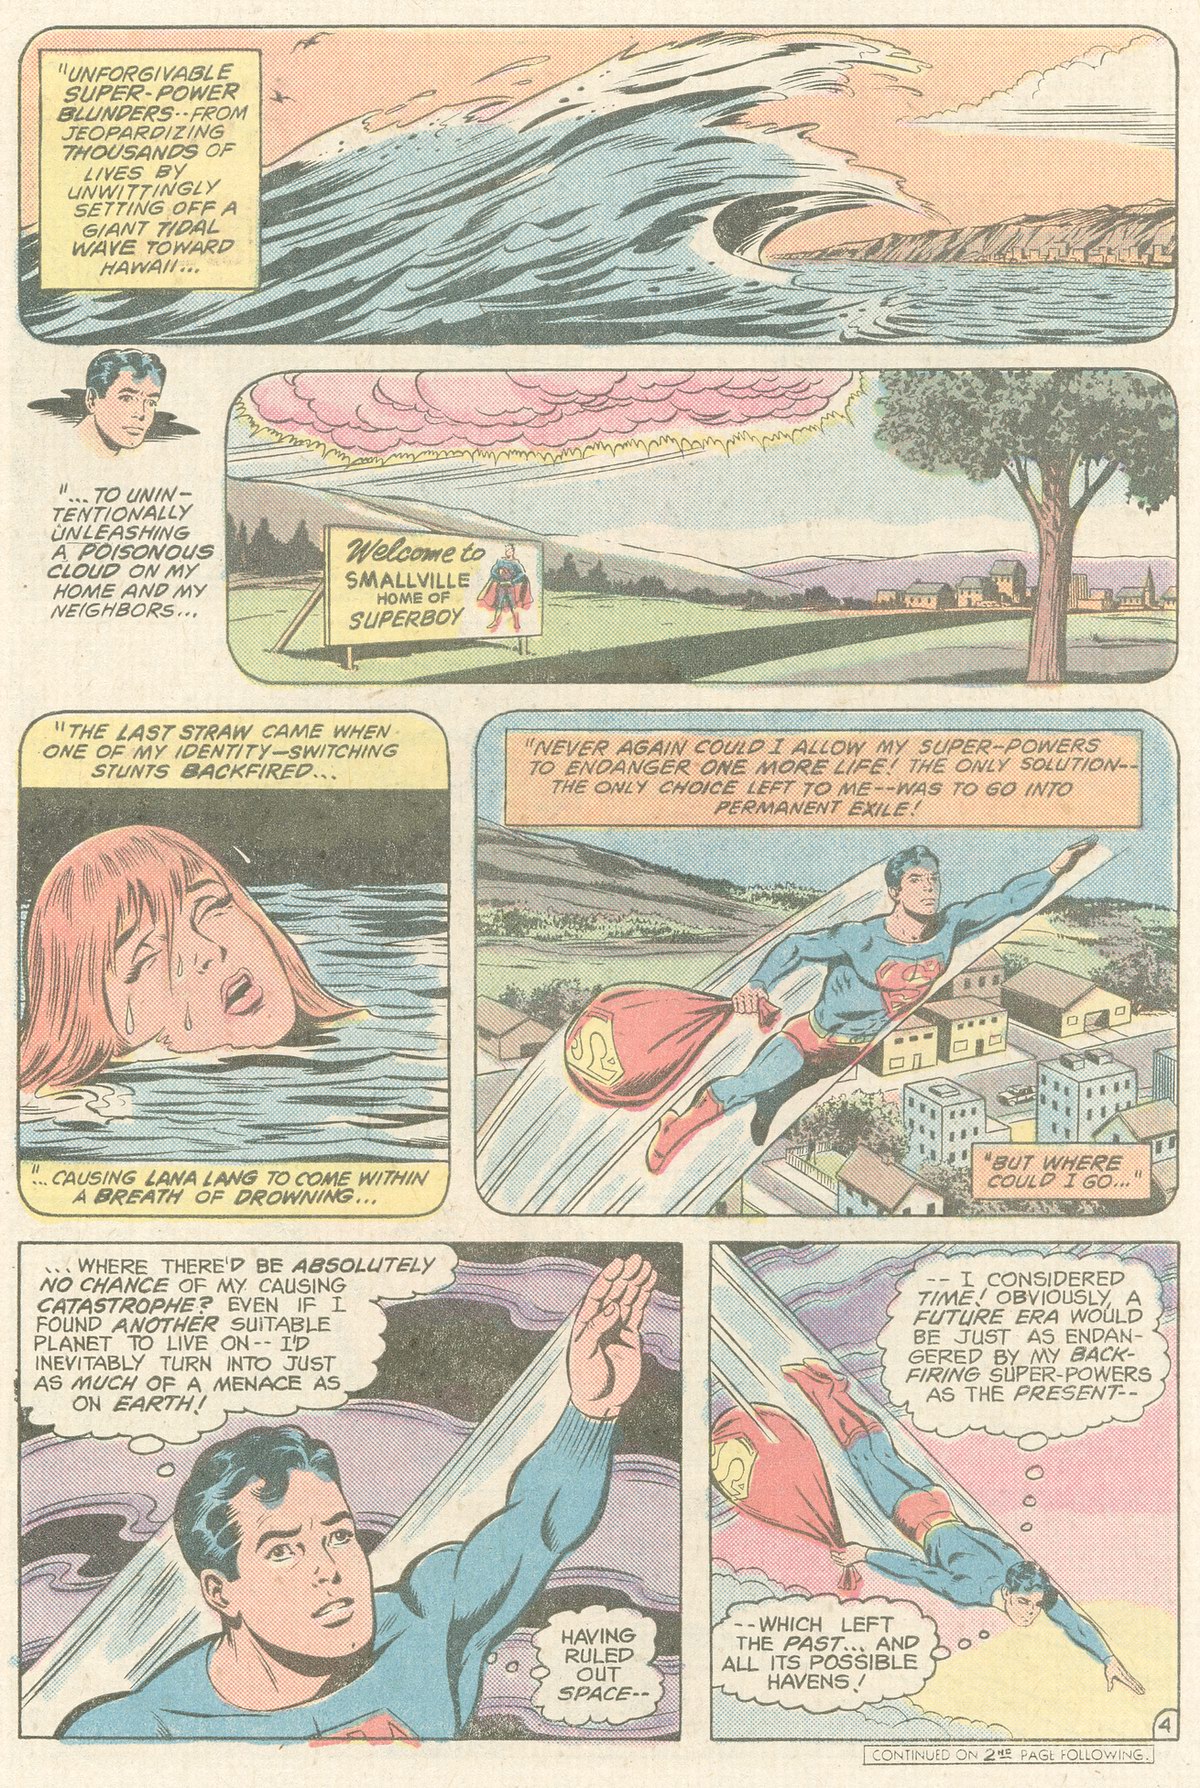 The New Adventures of Superboy 23 Page 4